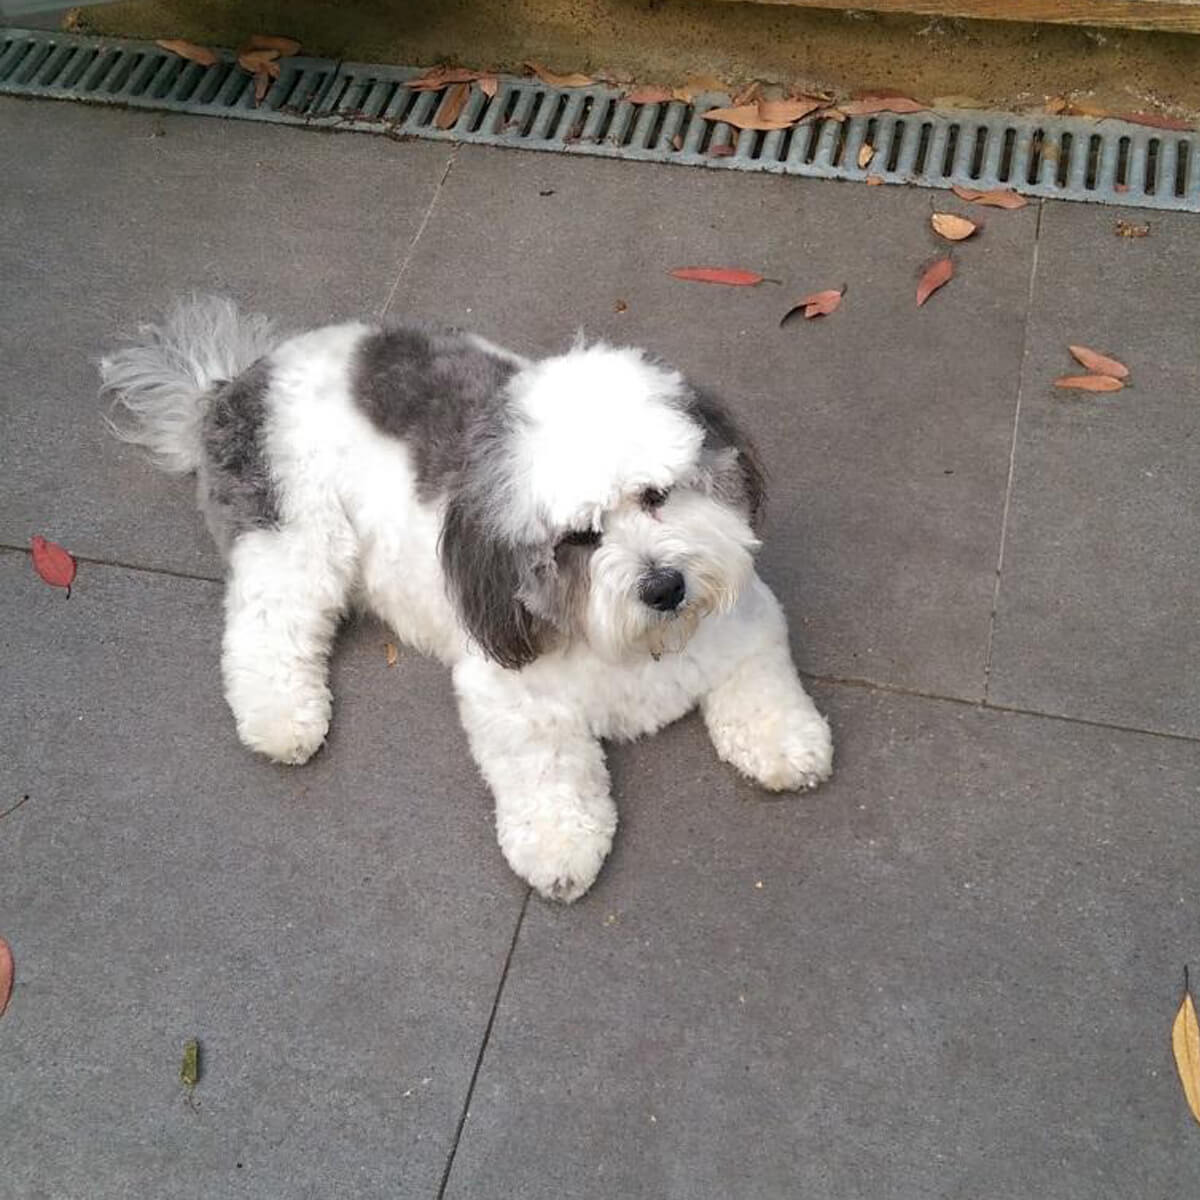 Zog, a white and grey fluffy dog lies on pavement